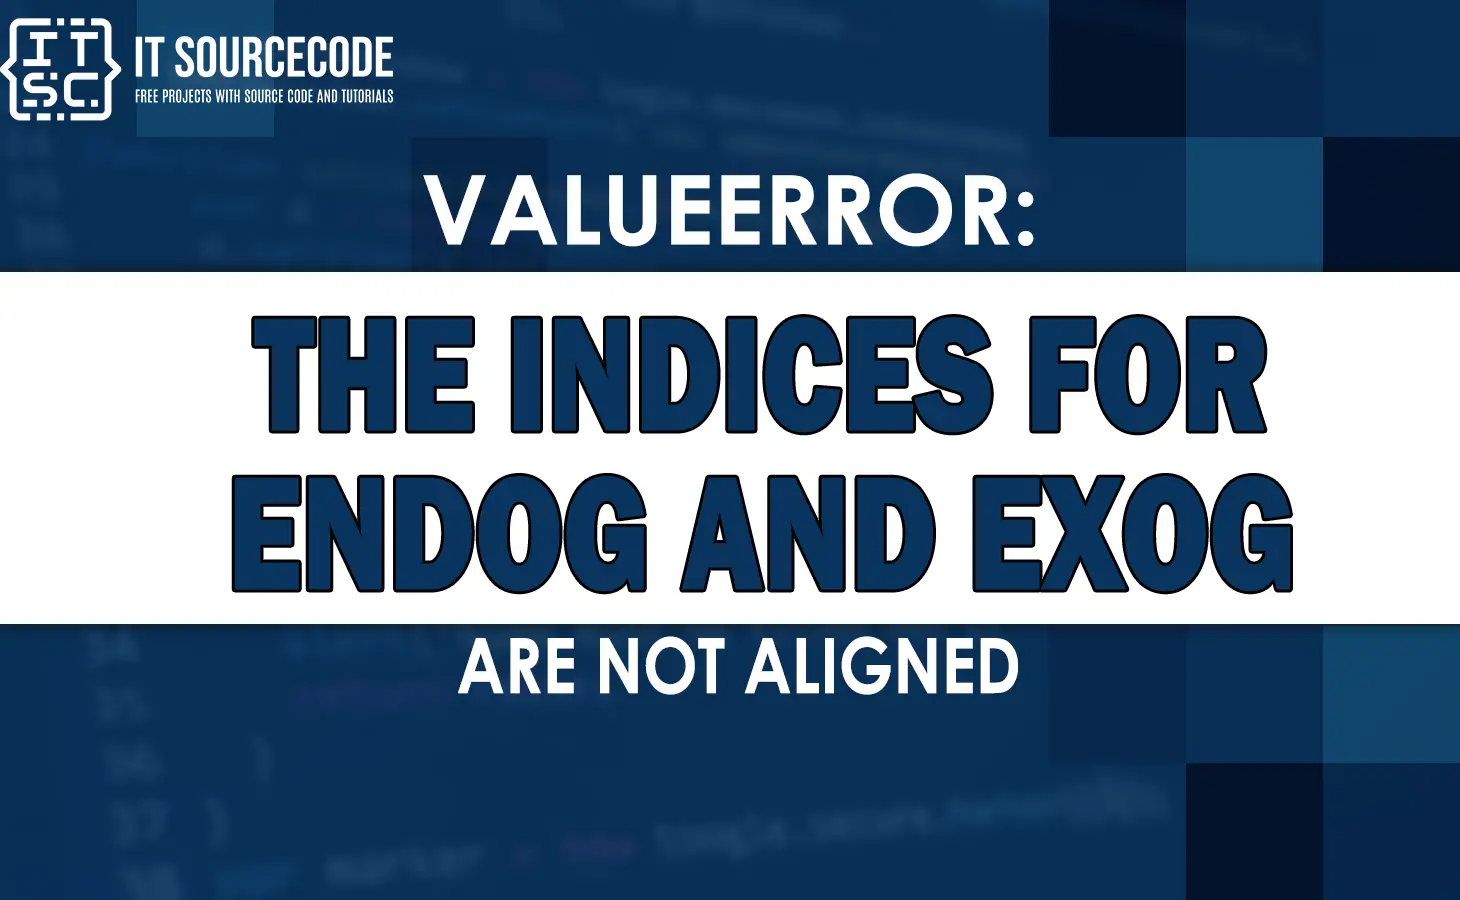 valueerror the indices for endog and exog are not aligned